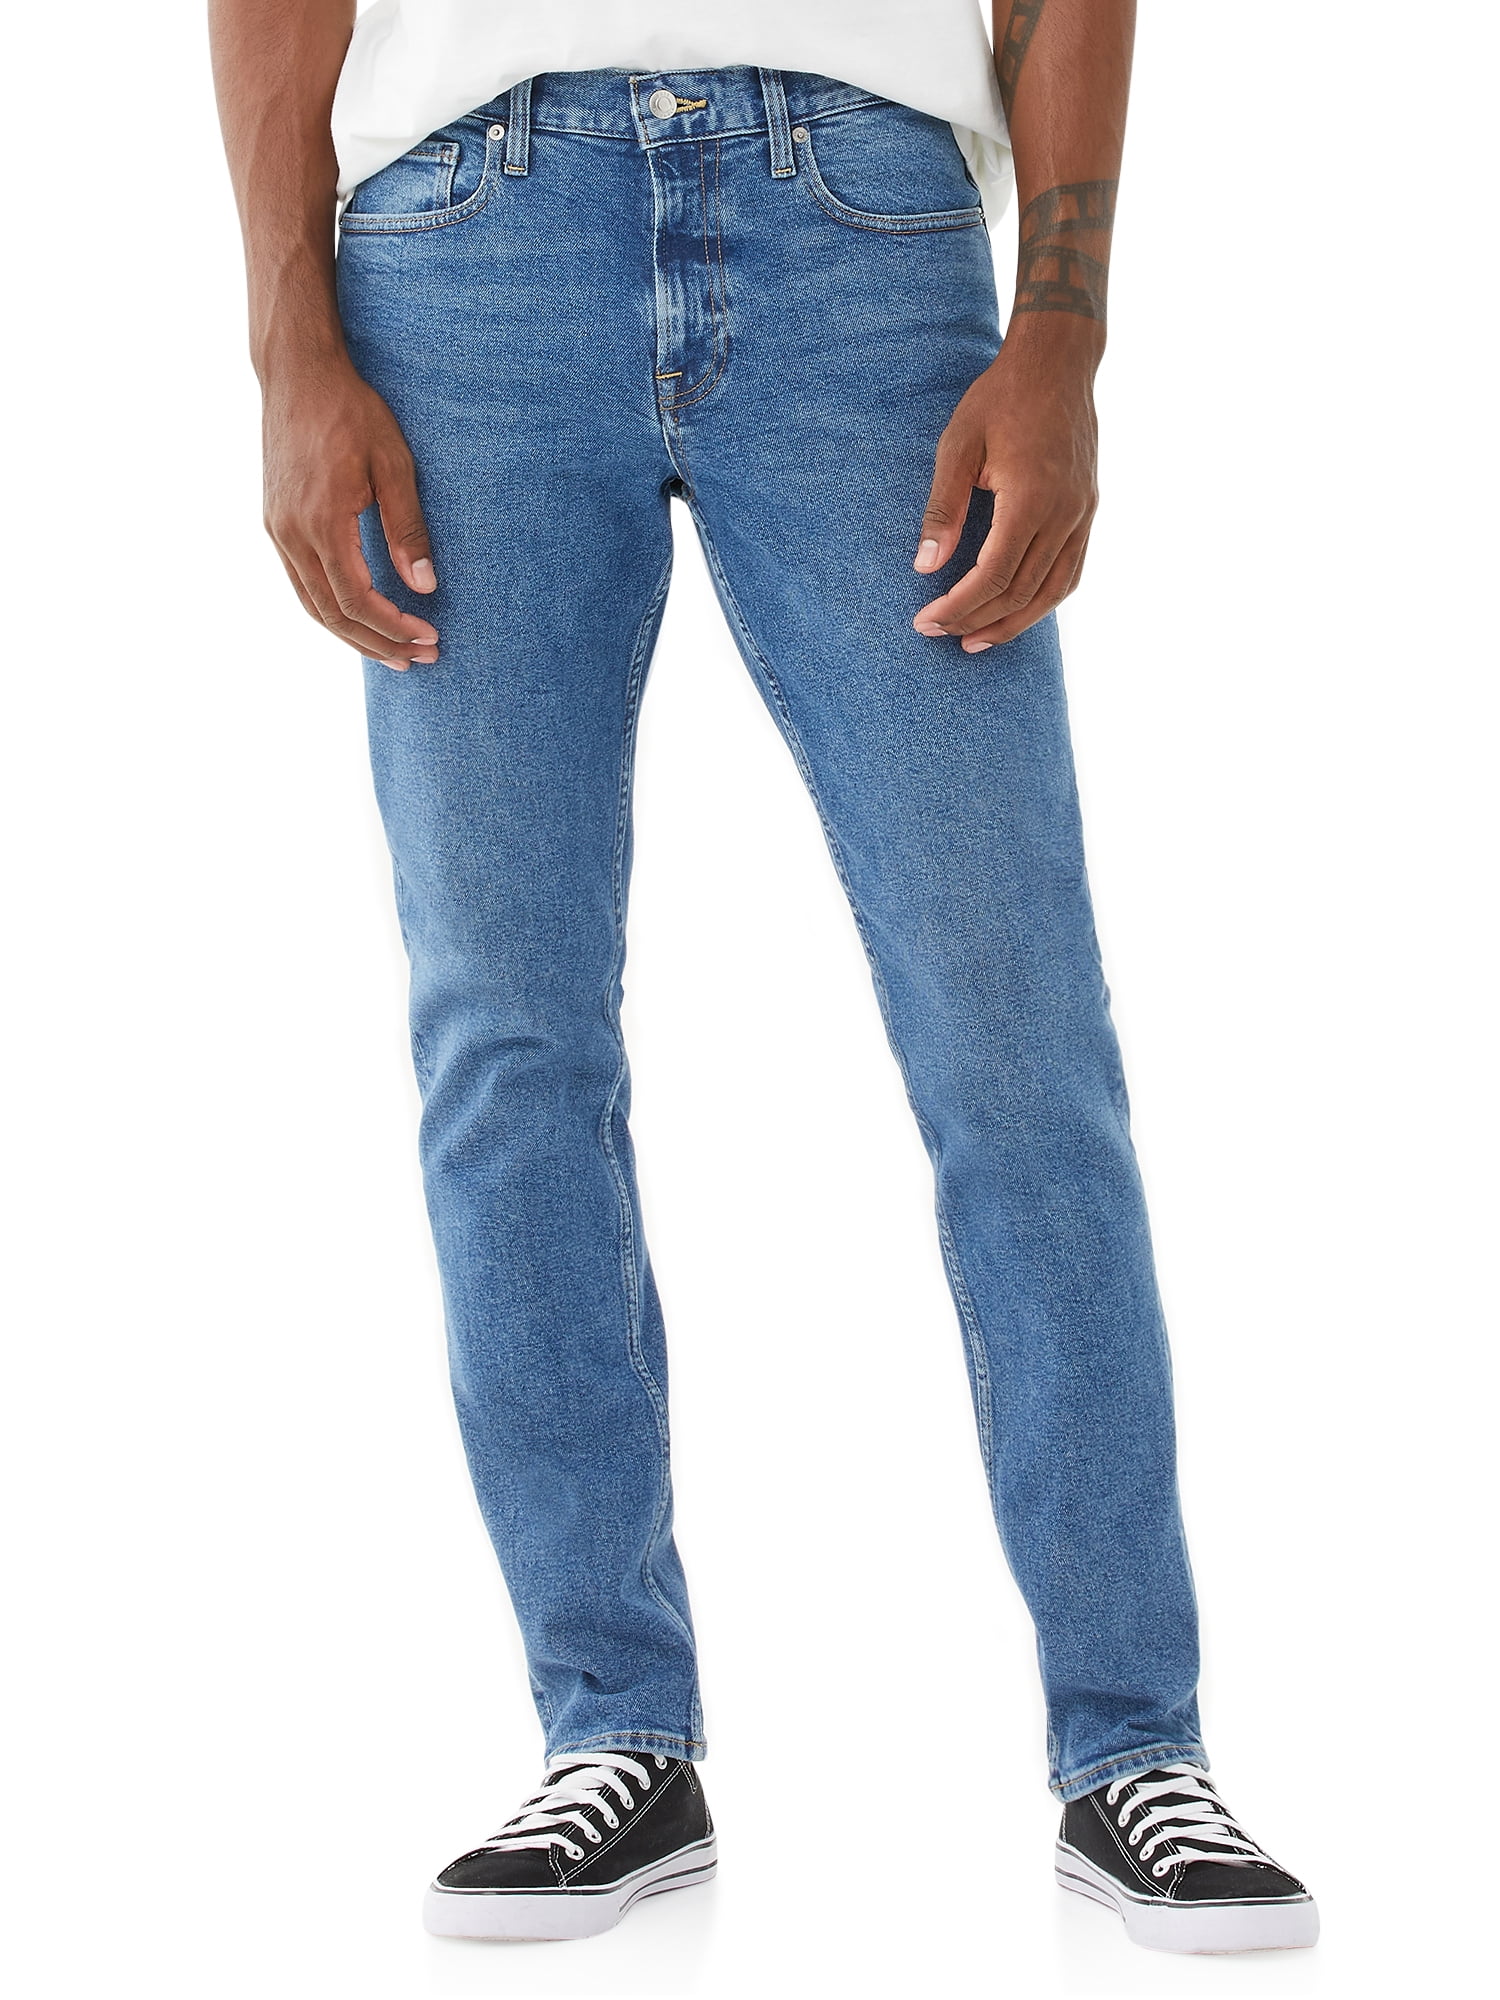 Free Assembly - Free Assembly Men's Athletic Slim Fit Jeans - Walmart ...